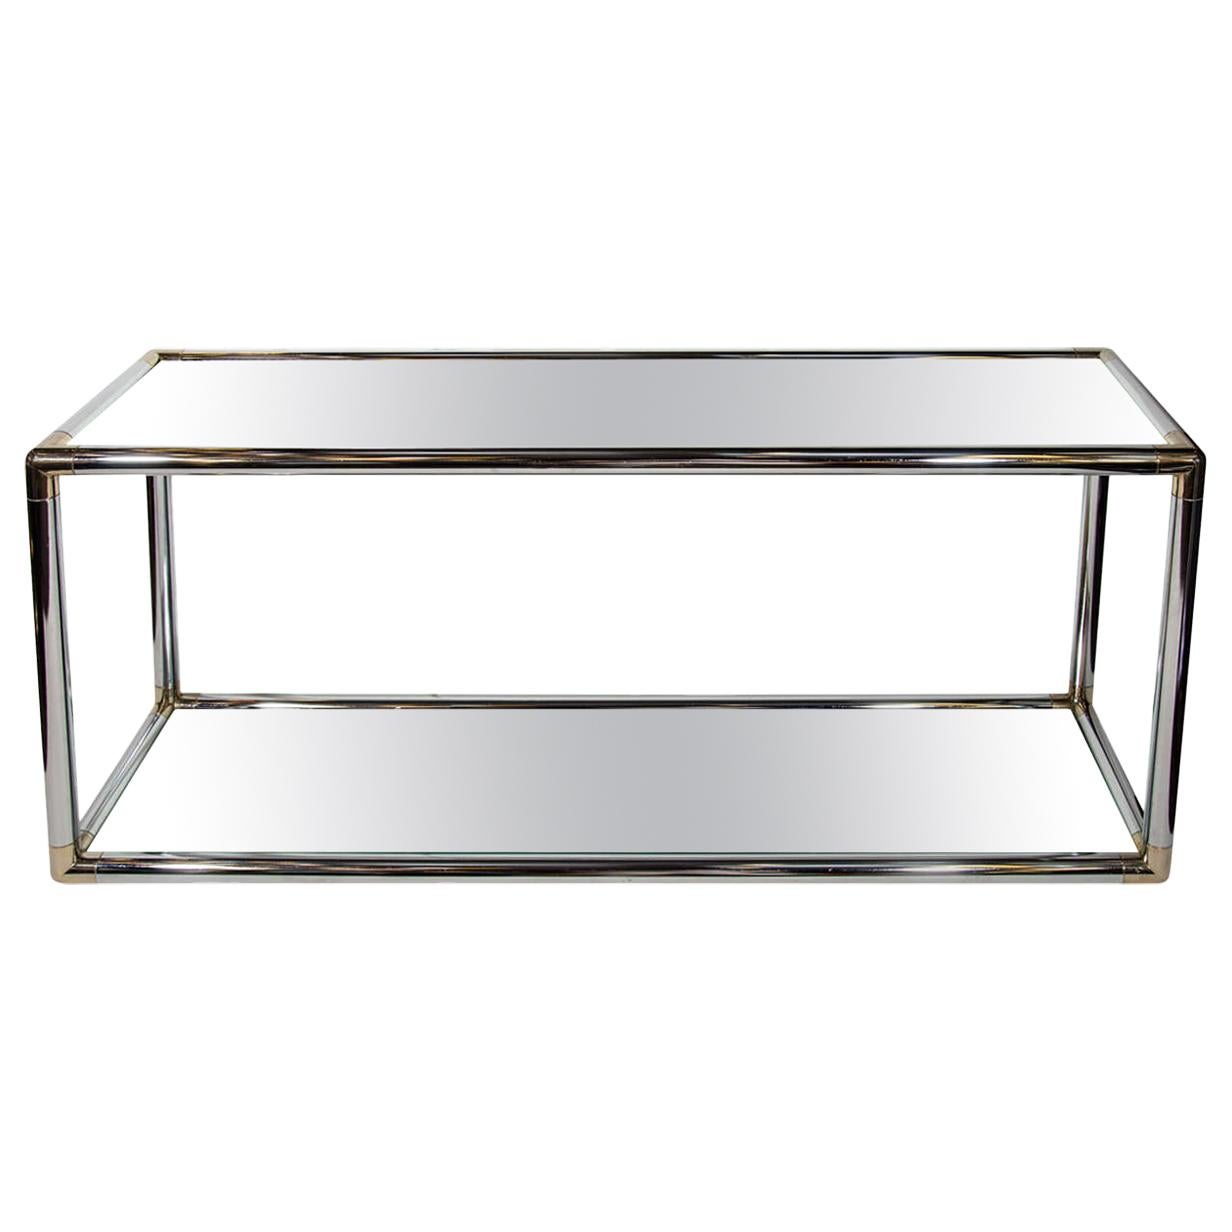 Romeo Rega Style Chrome and Mirrored Double Console Table, 1970s